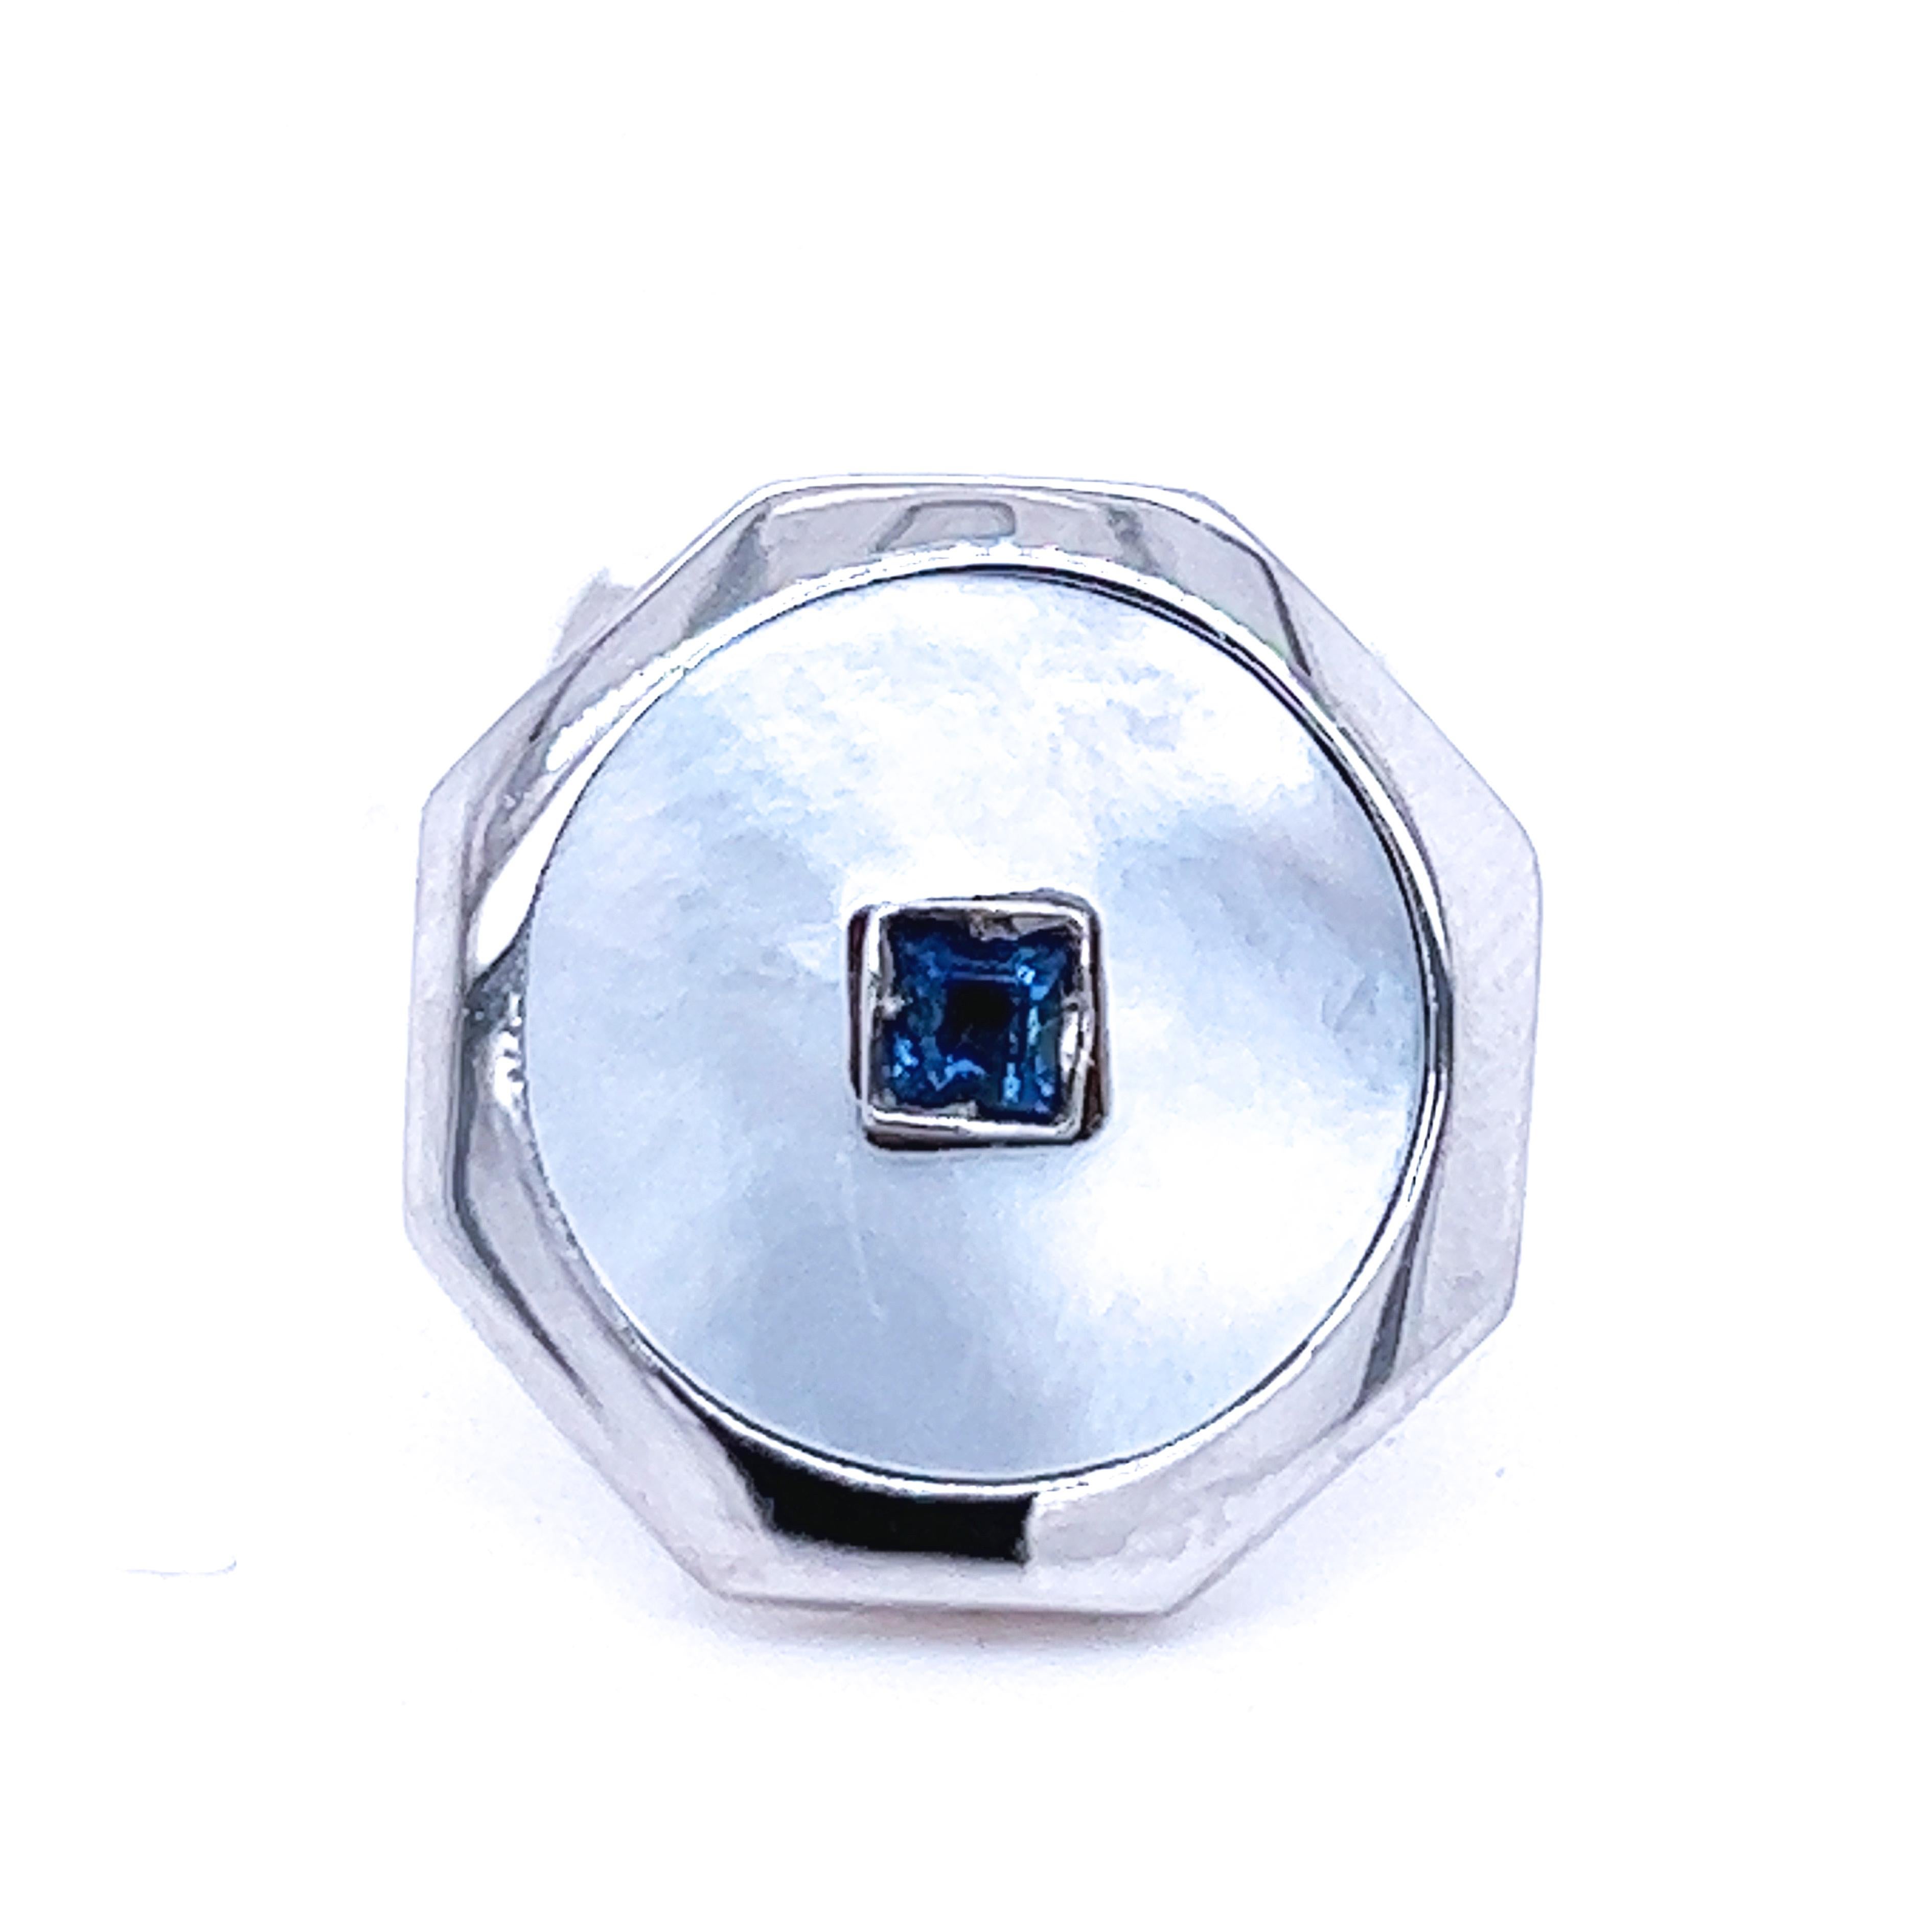 Absolutely Chic Yet Timeless 0.25 Carat Square Shaped Natural Royal Blue Sapphire in a white round hand enameled mother-of-pearl disk, octagonal setting white gold,  t-bar back.
In our smart tobacco suede leather box and pouch.